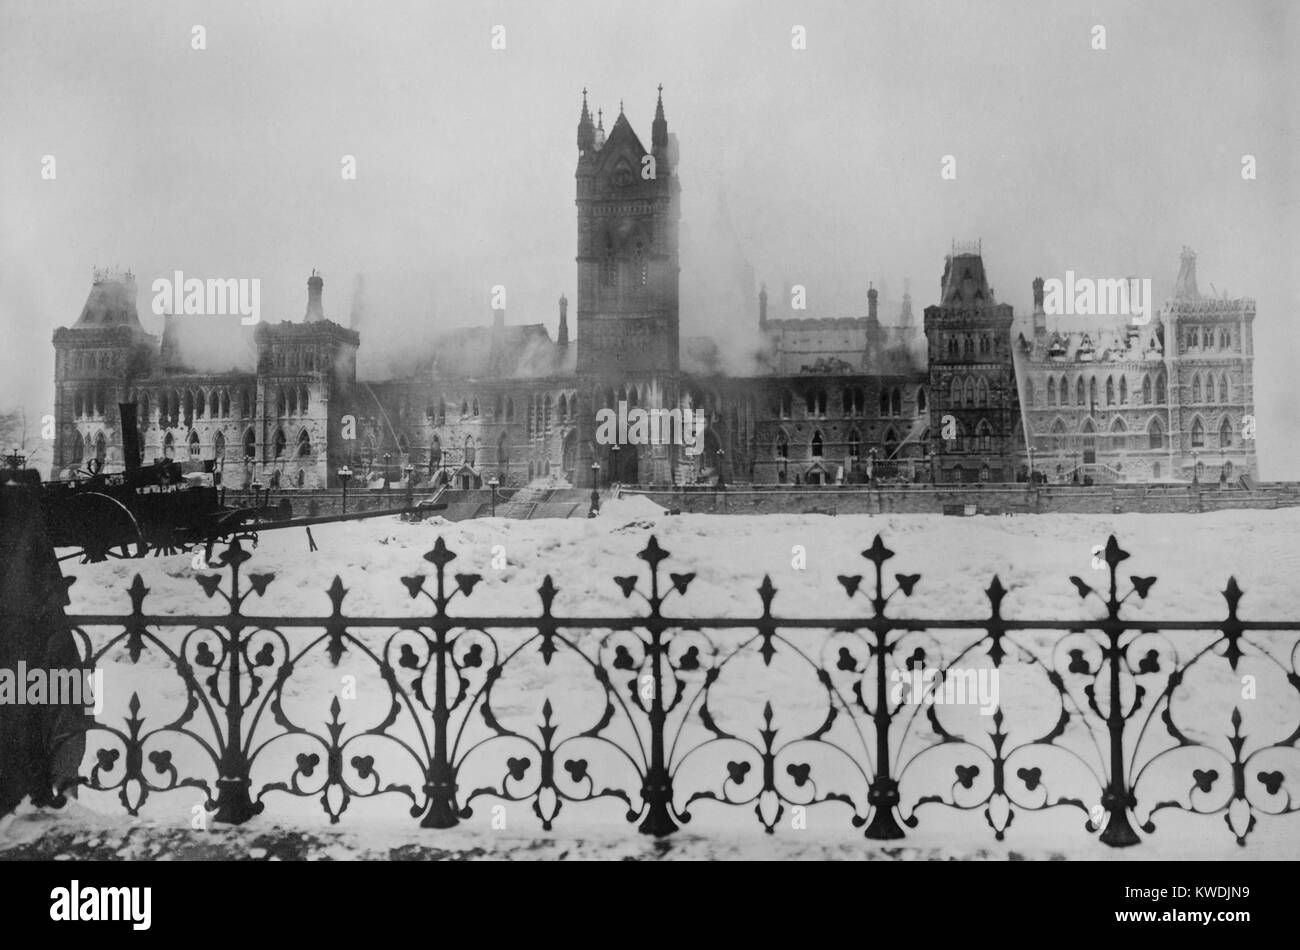 Ruins of the Canadian Parliament building in Ottawa, after a fire on the night of Feb. 3, 1916. Firemen continue to spray the smoldering fire. It was feared the fire was caused by WW1 sabotage, but a Royal Commission determined careless smoking was the cause (BSLOC 2017 17 104) Stock Photo